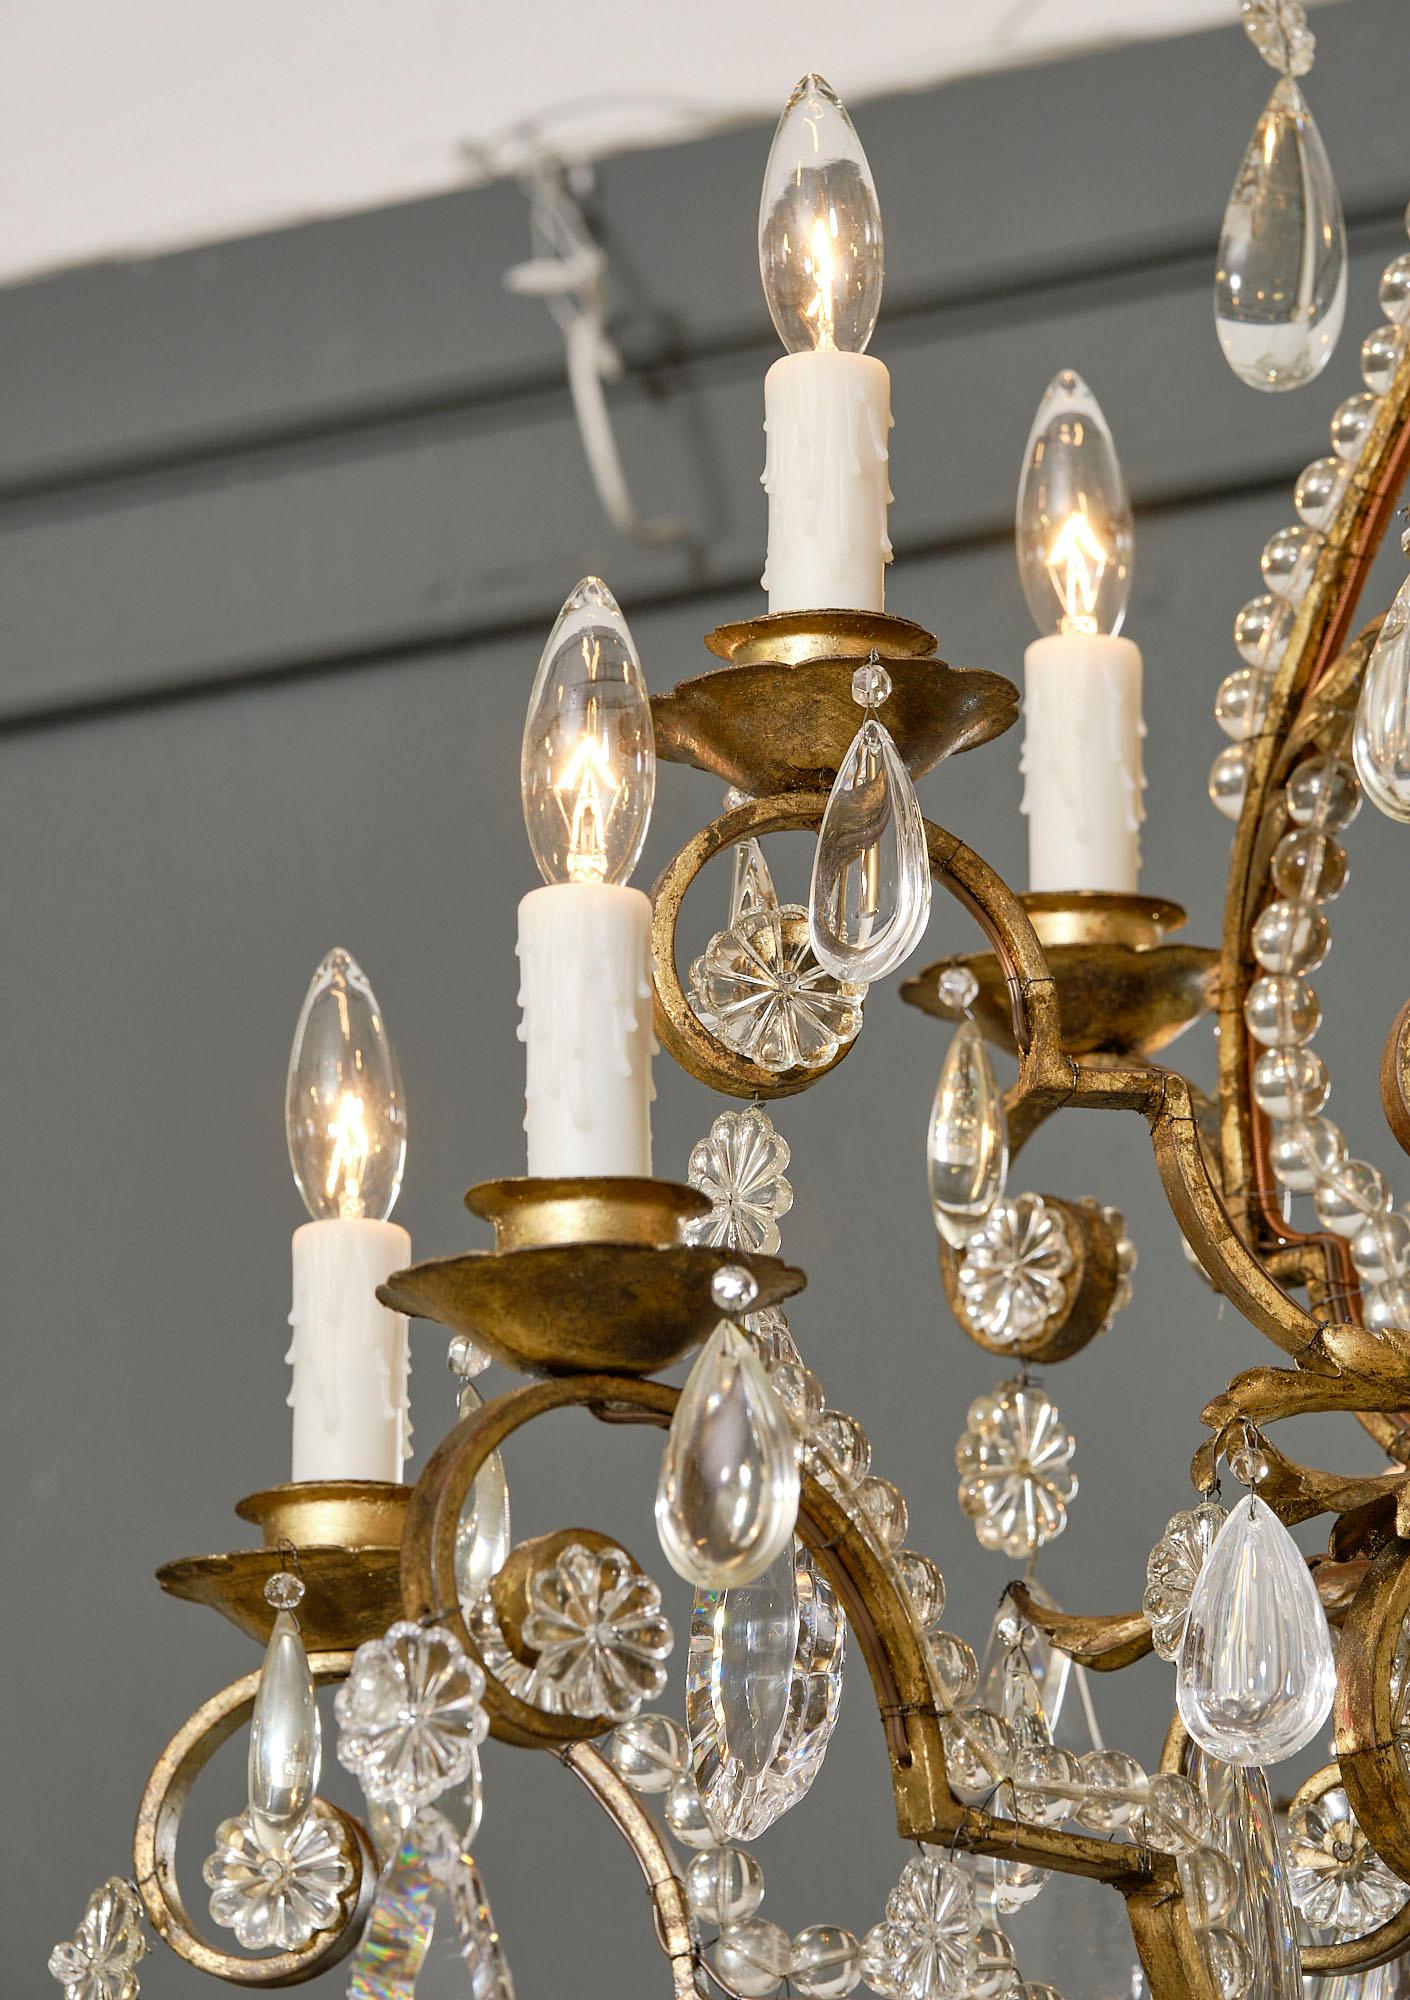 Early 20th Century Antique Baccarat Crystal Chandelier For Sale